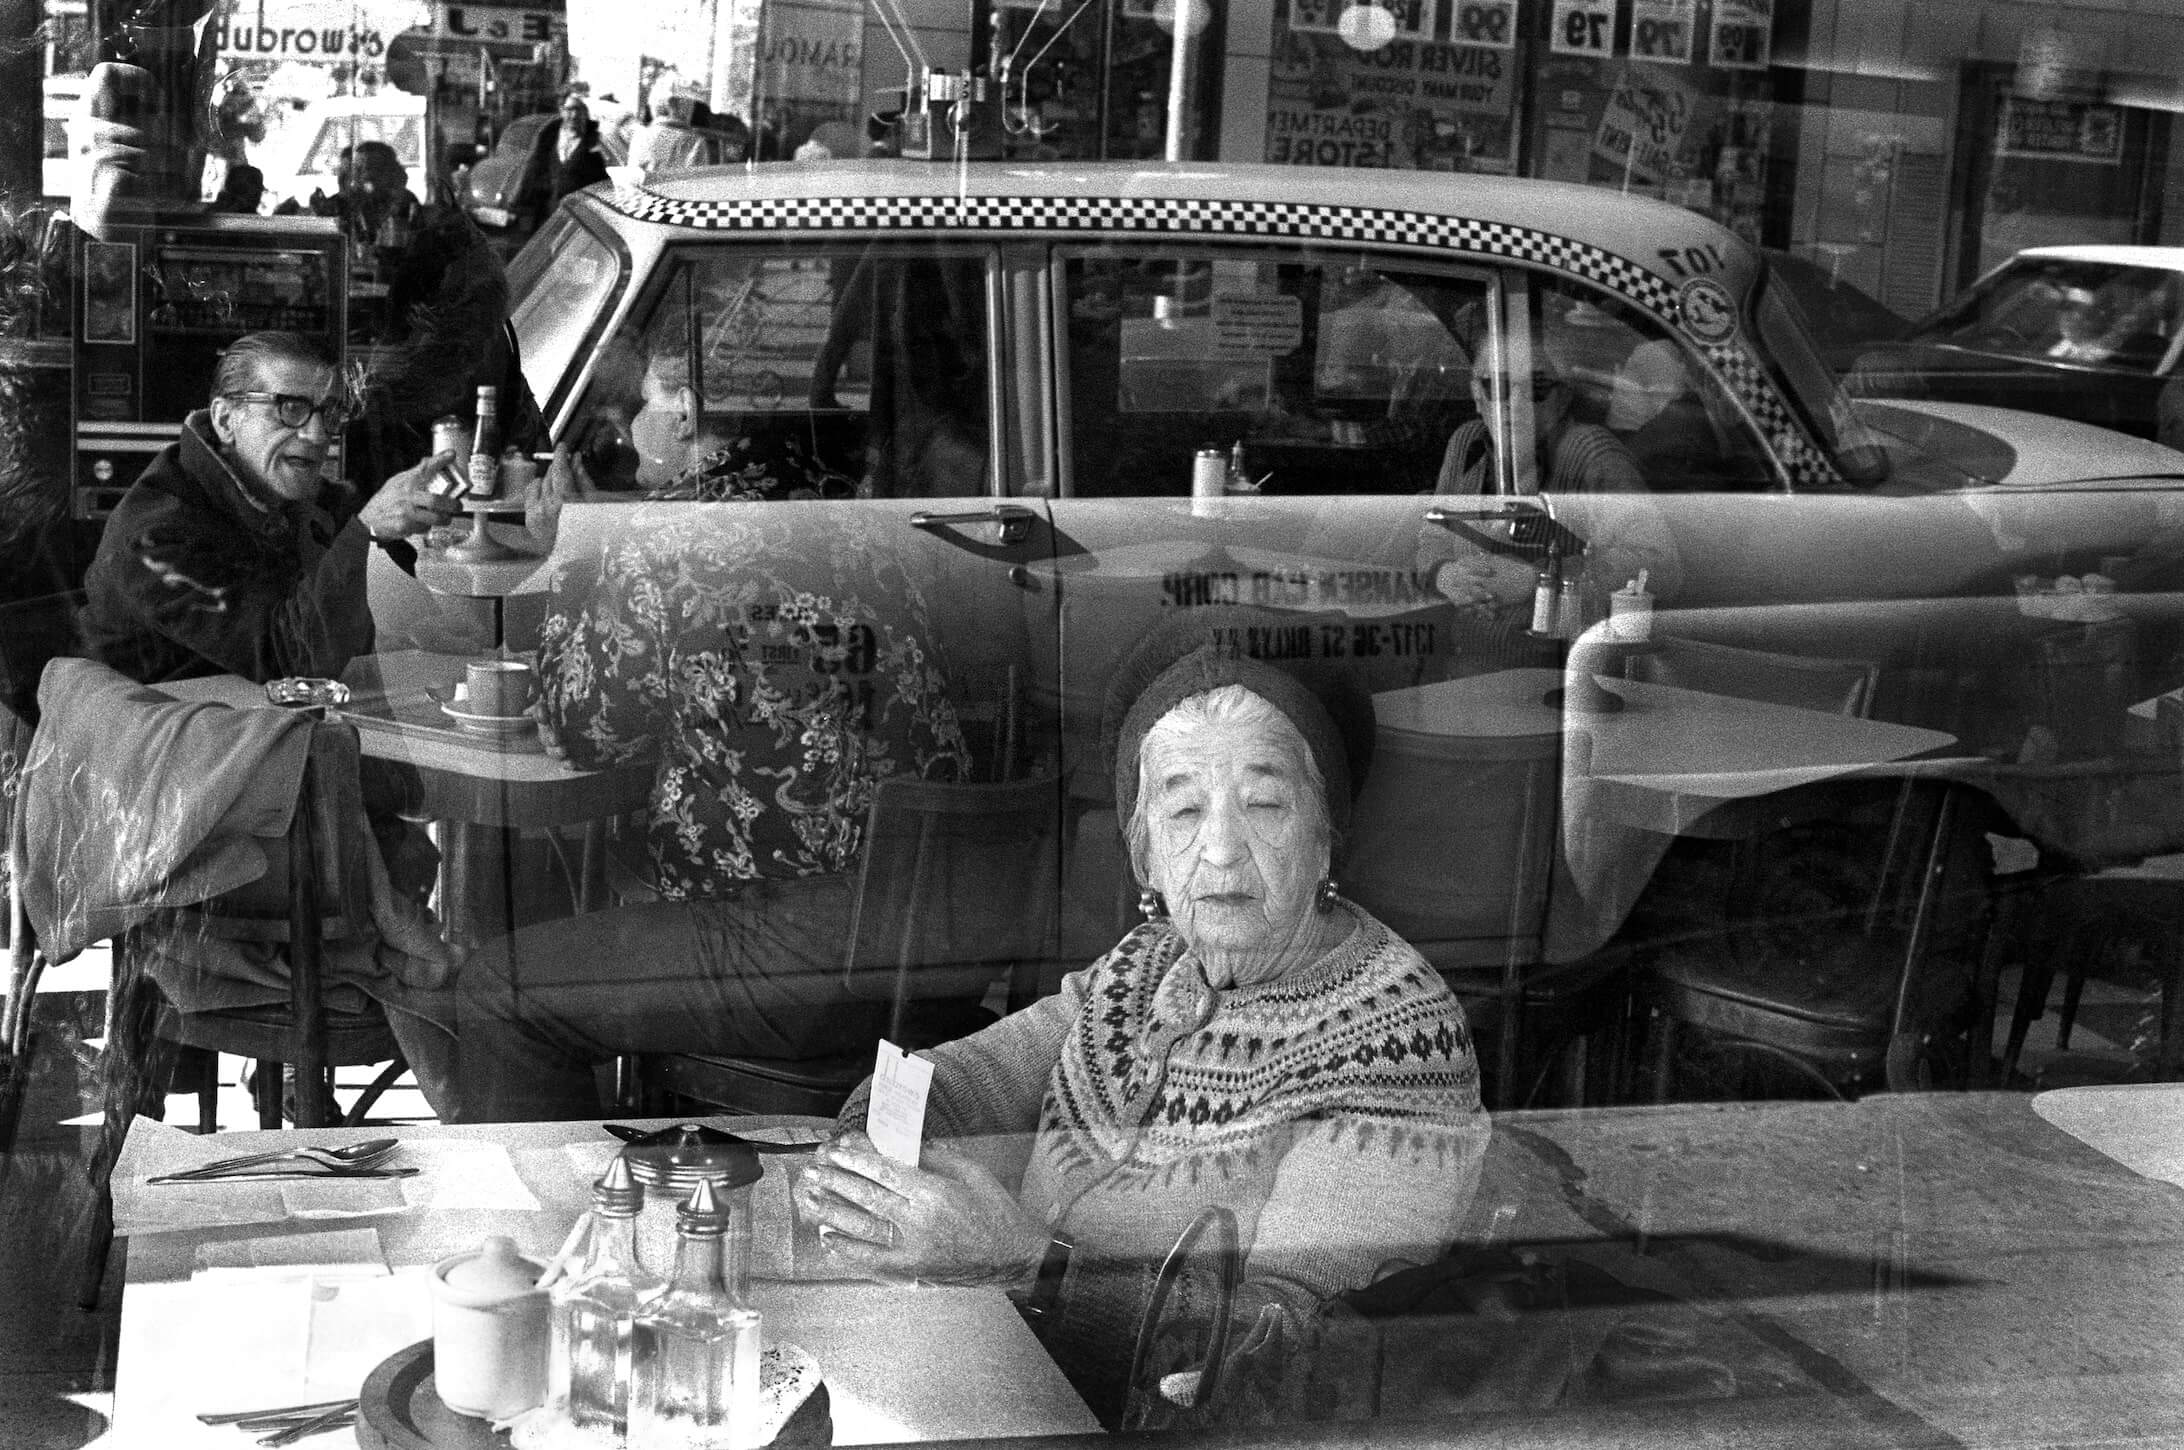 An elderly woman sitting at a table is photographed through a window, with the reflection of the street outside superimposed on her face.